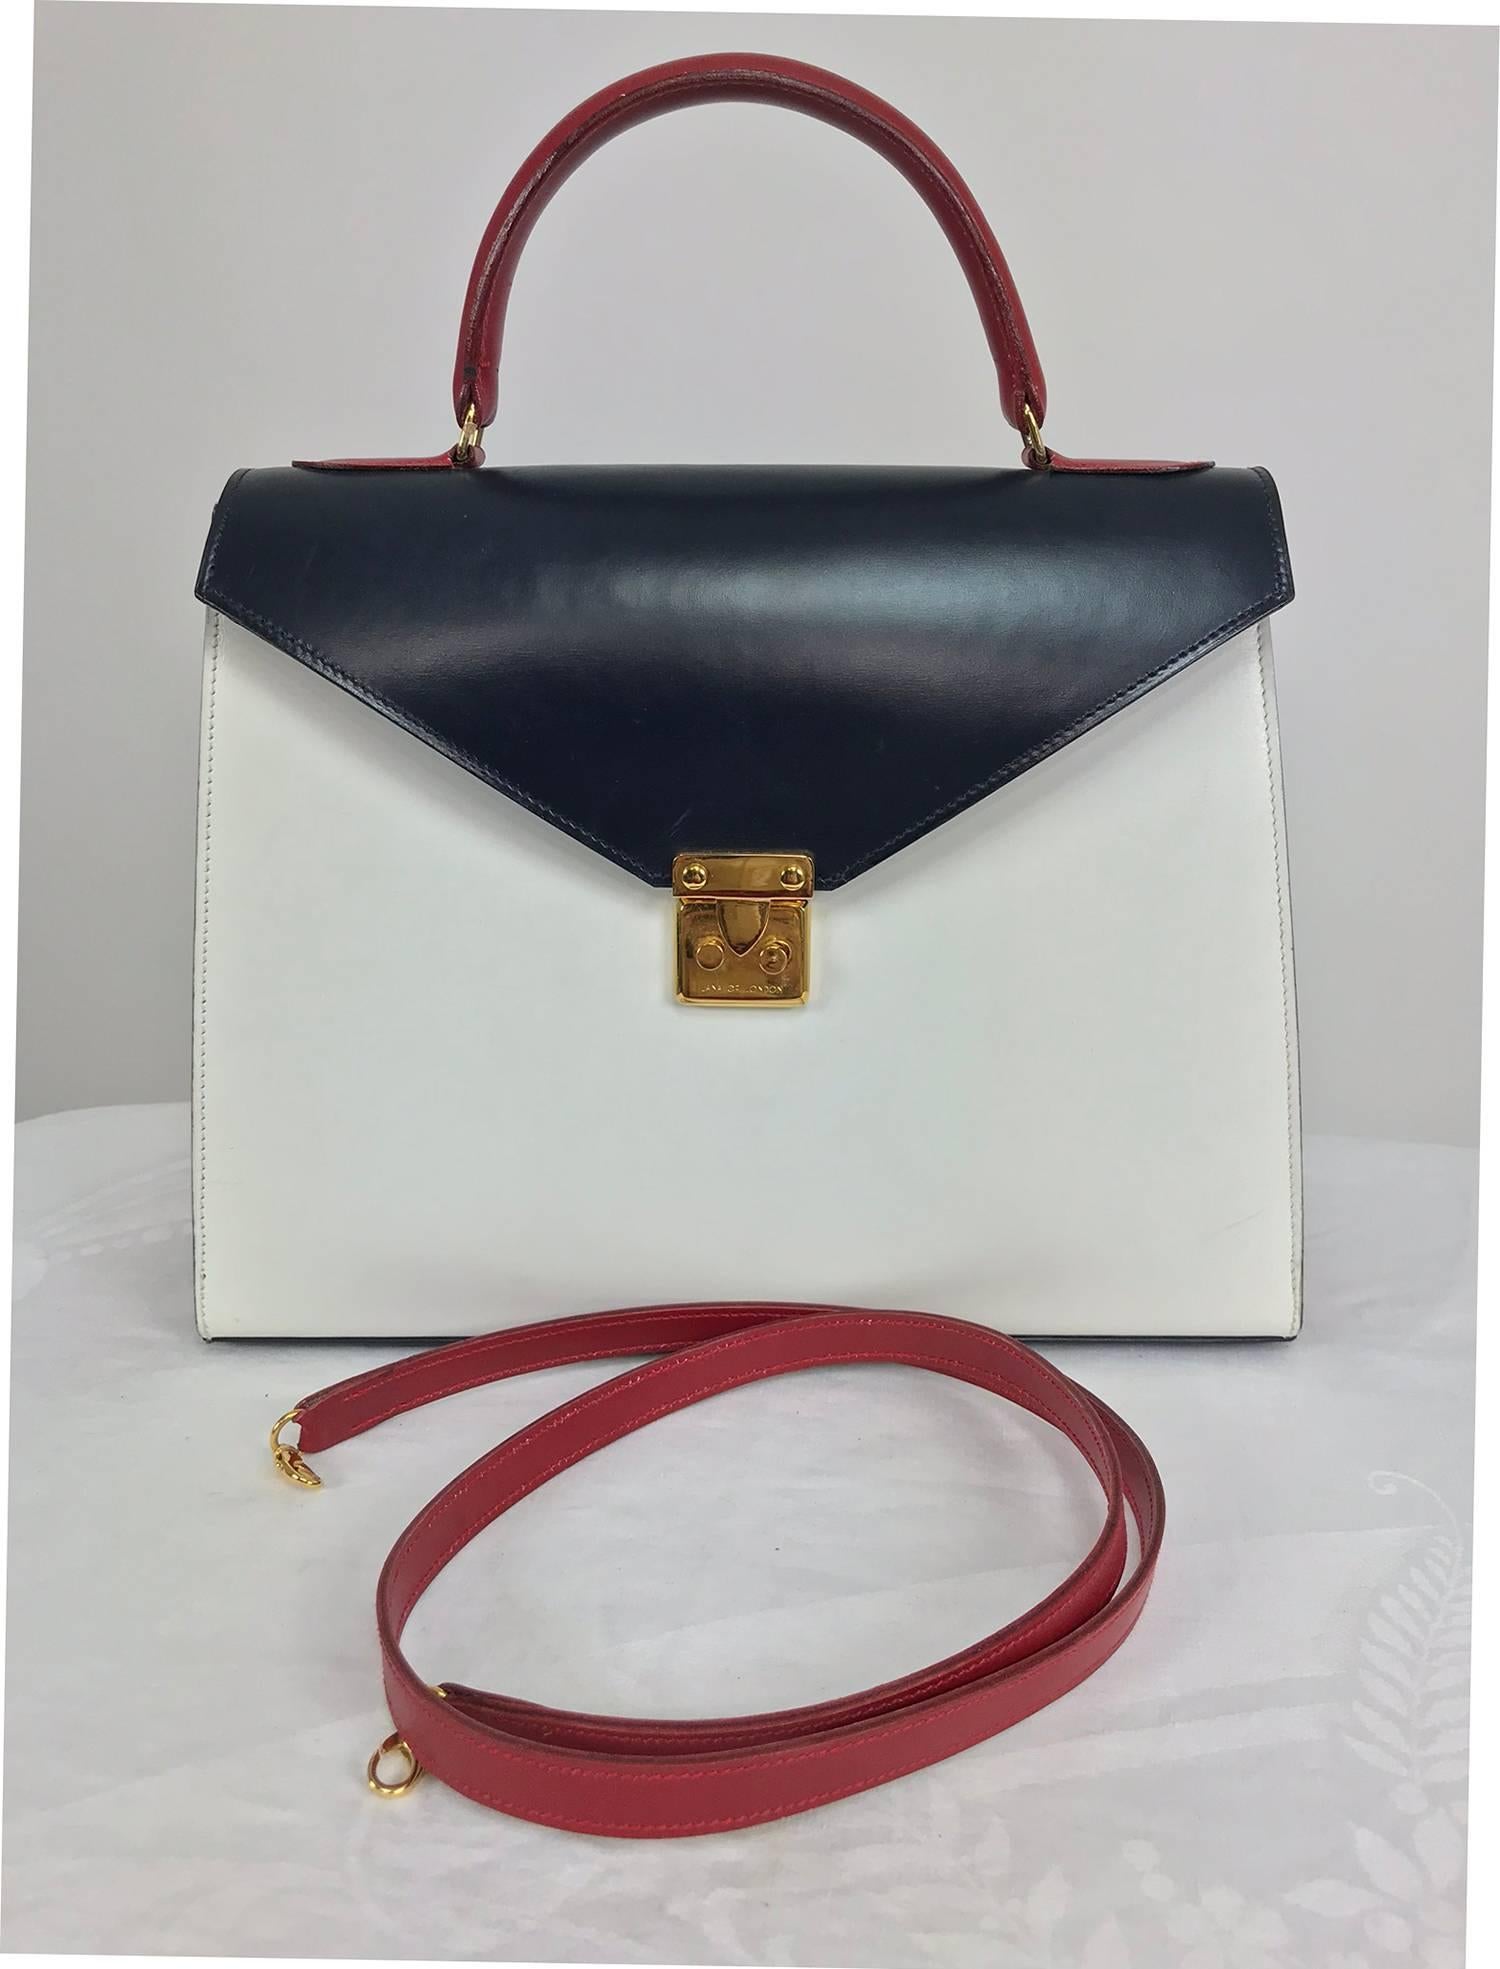 Lana of London red white and blue box calf handbag with gold hardware and shoulder strap. Beautifully crafted bag in colour blocked  red, white and blue. Top handle bag comes with removable shoulder strap. Fully lined in buttery soft red leather,